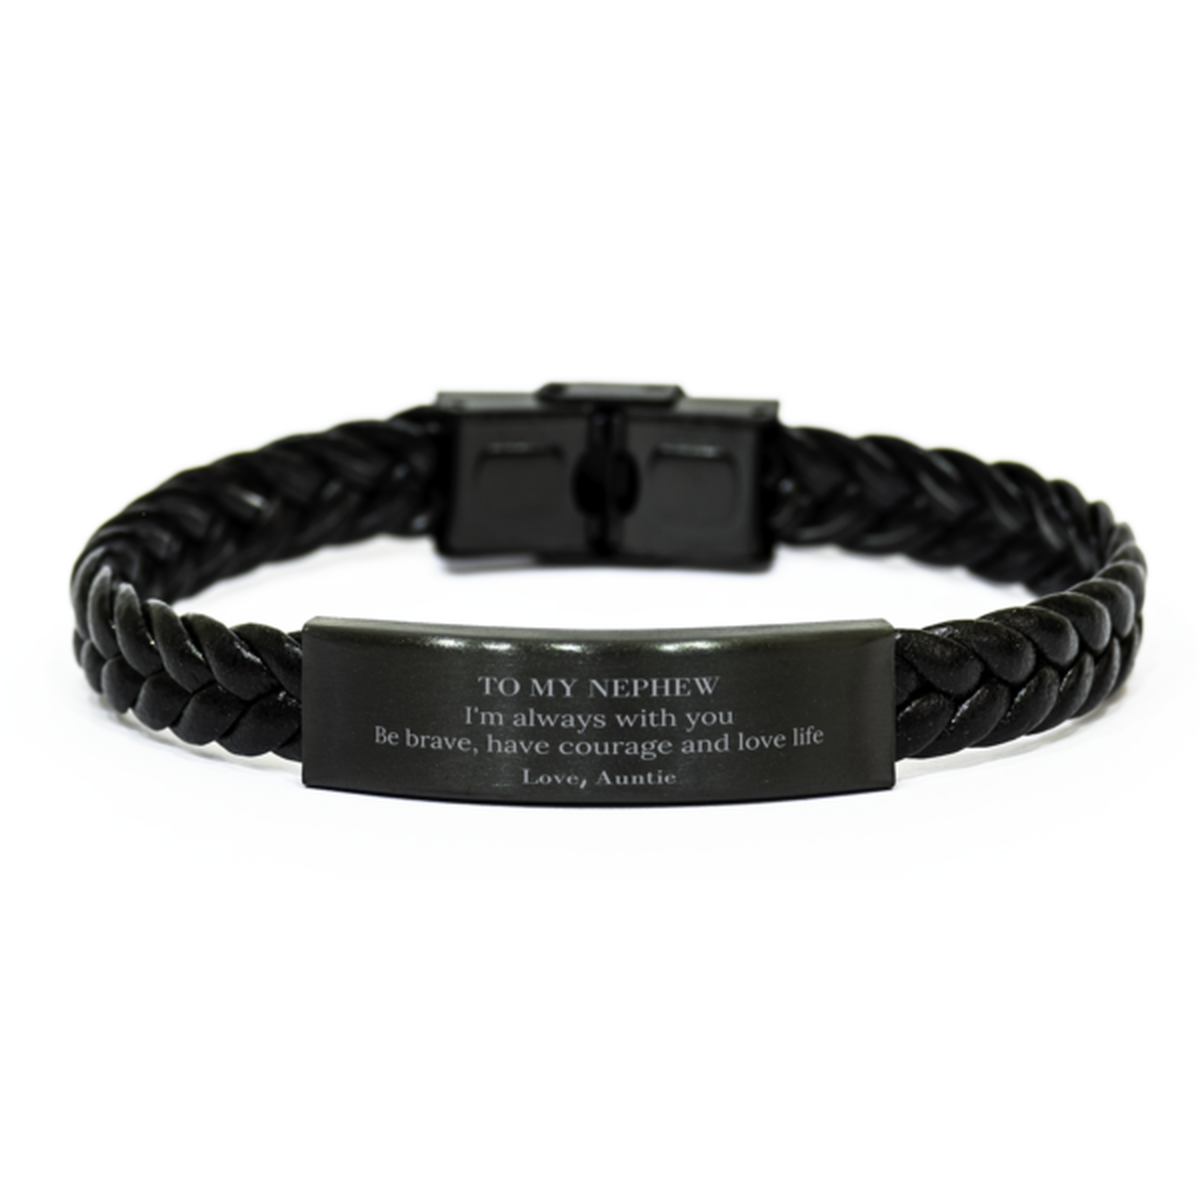 To My Nephew Gifts from Auntie, Unique Braided Leather Bracelet Inspirational Christmas Birthday Graduation Gifts for Nephew I'm always with you. Be brave, have courage and love life. Love, Auntie